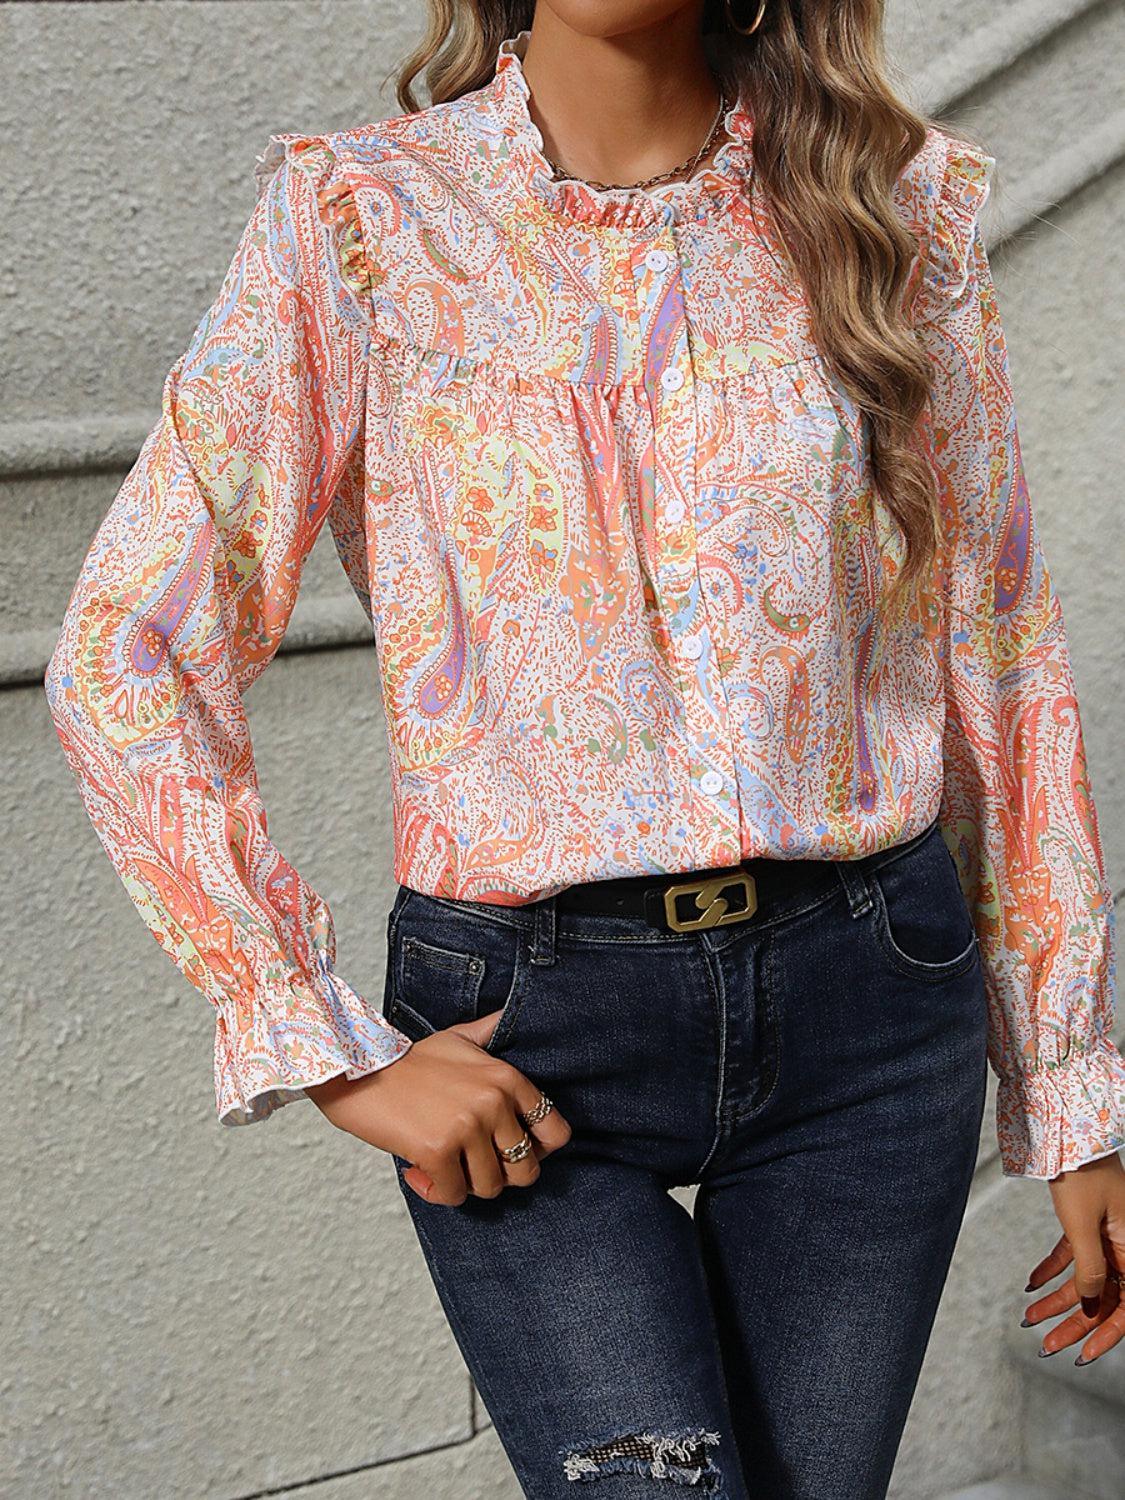 a woman wearing a blouse and jeans posing for a picture